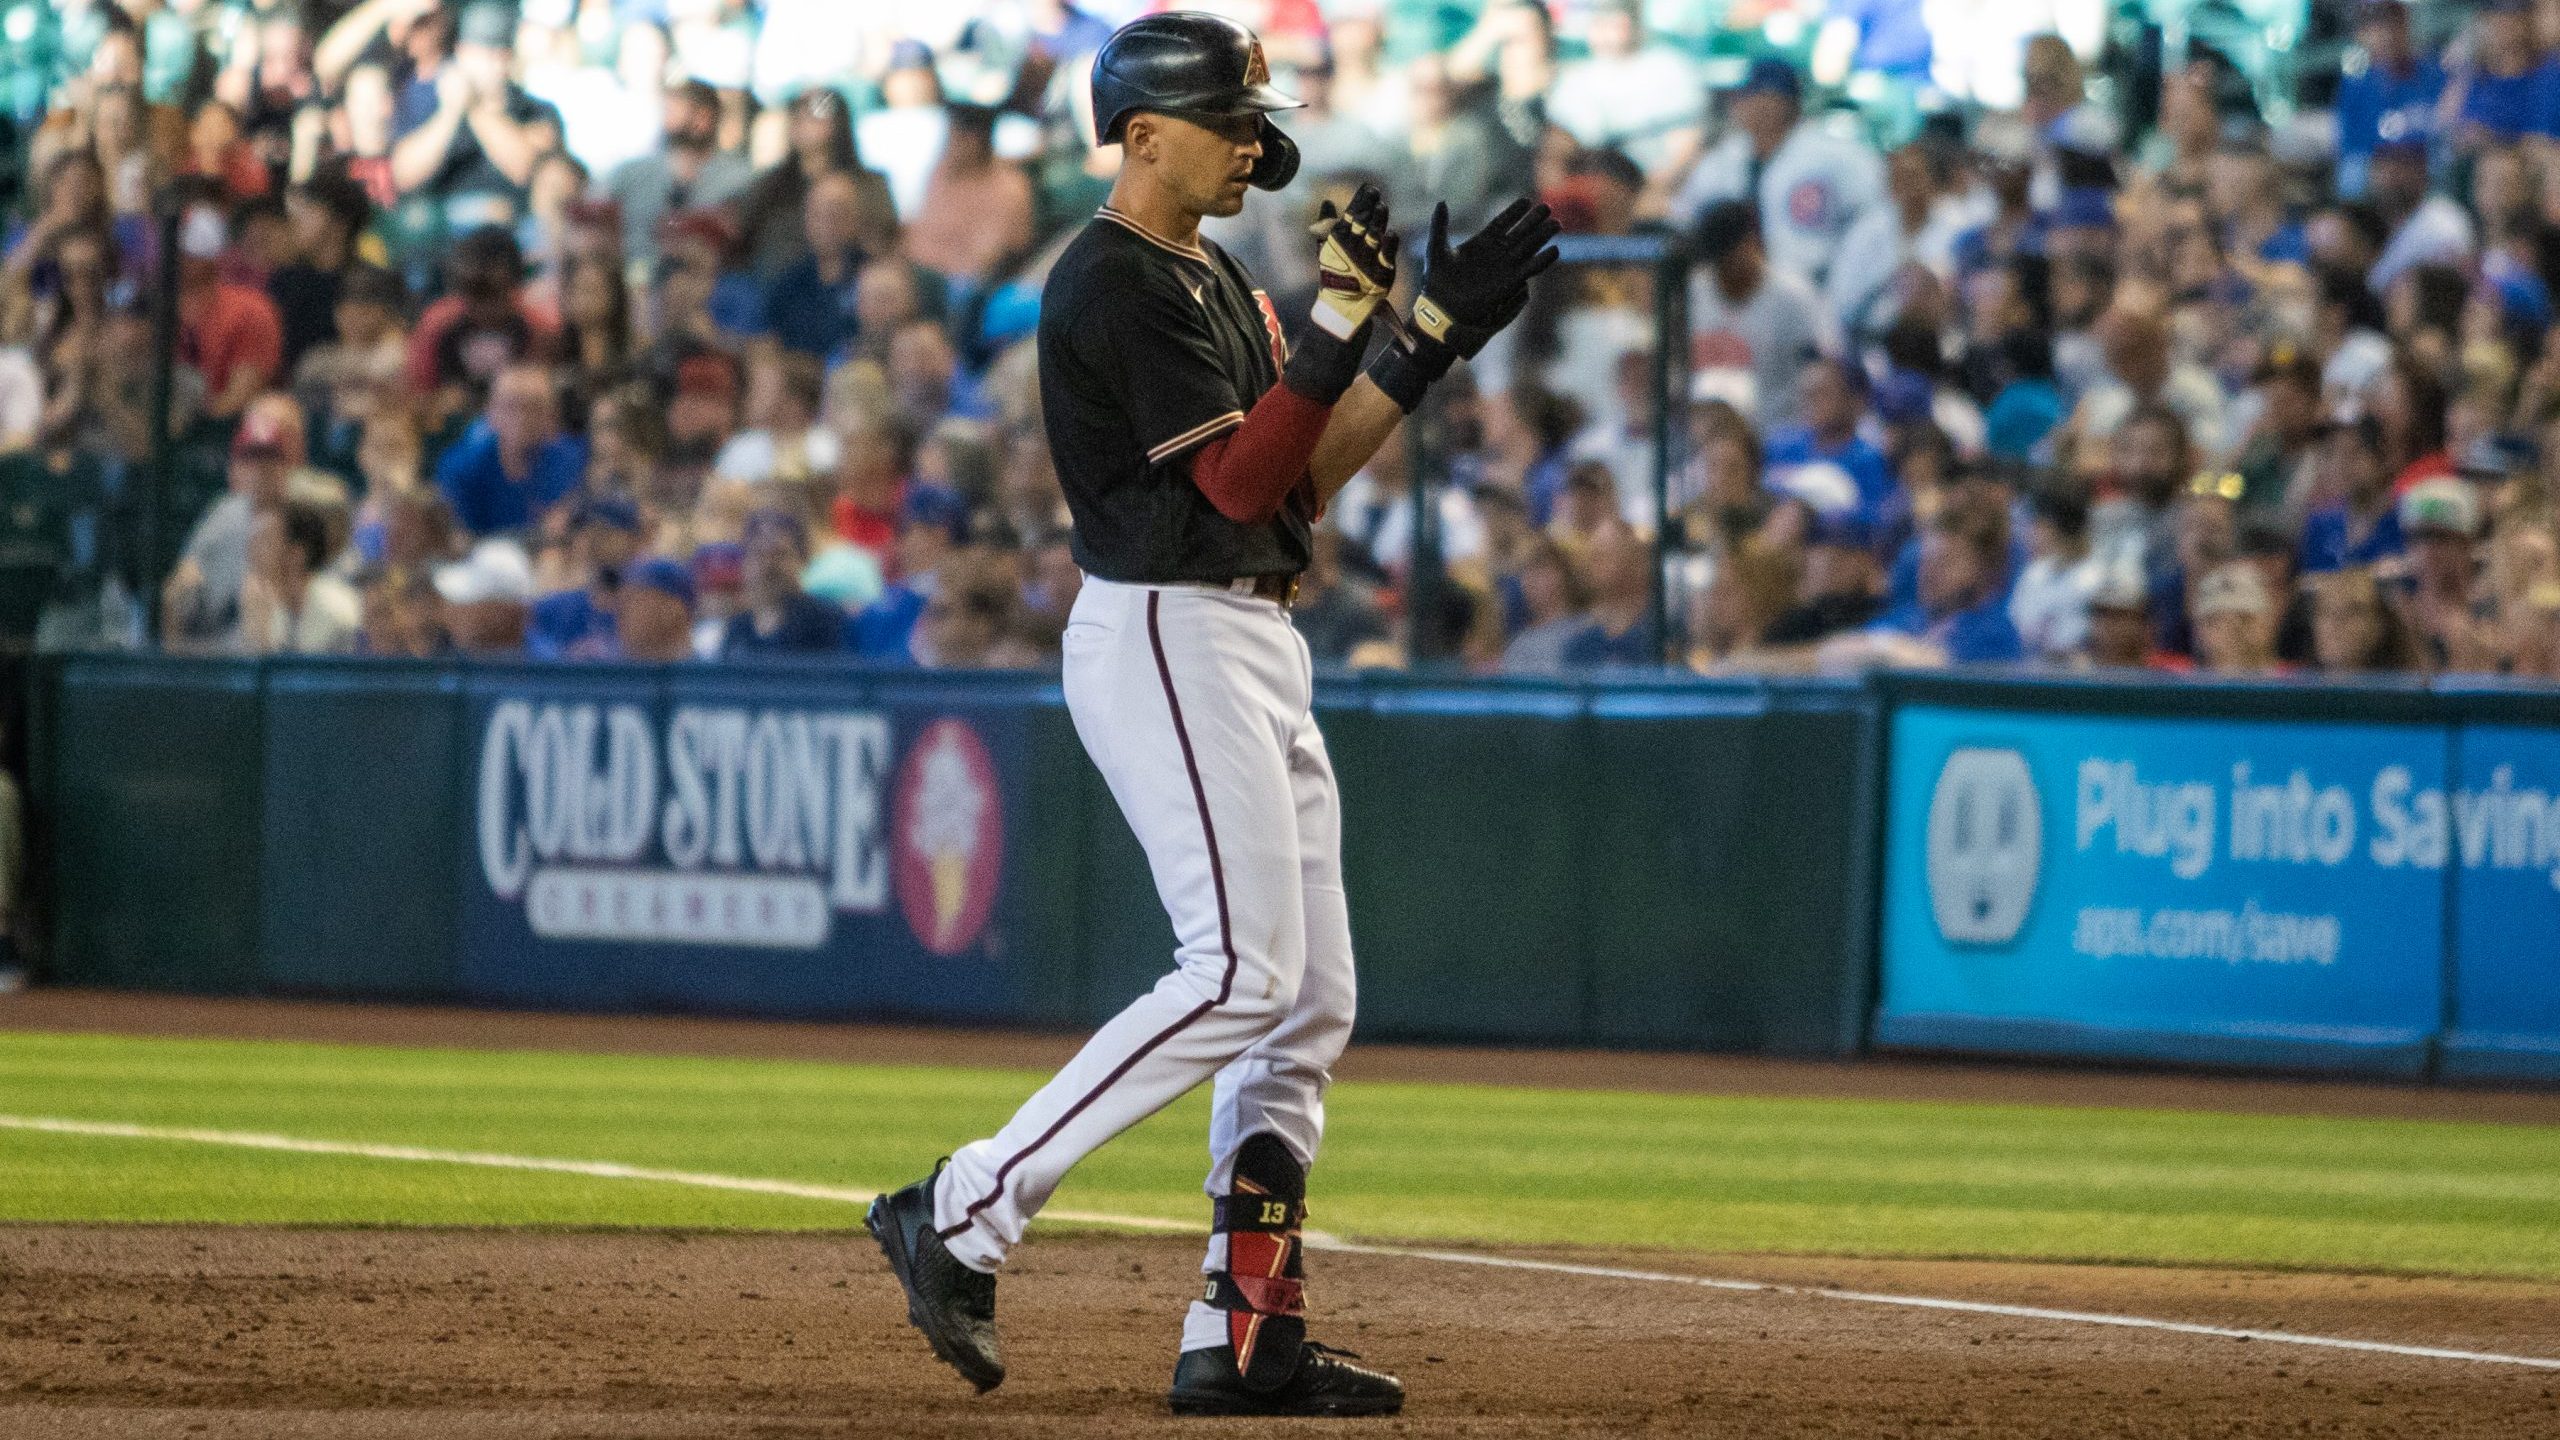 Arizona Diamondbacks shortstop Nick Ahmed claps after an RBI single against the Chicago Cubs at Cha...